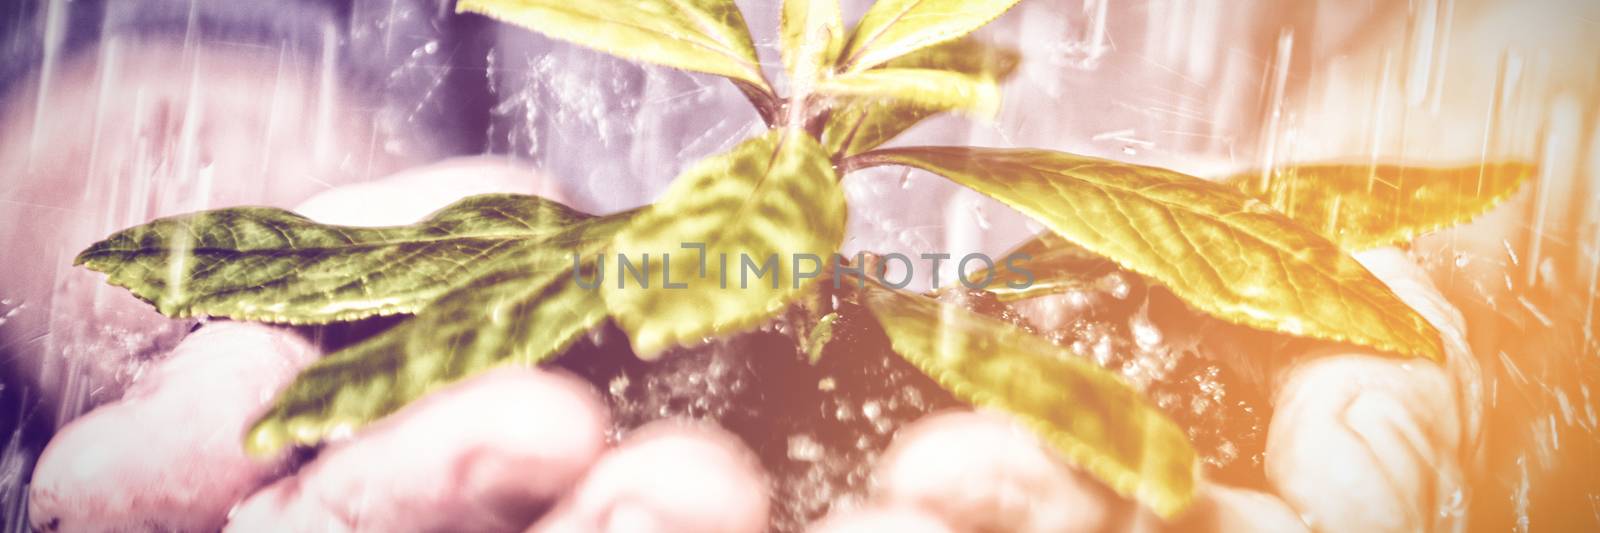 Close up of hands holding seedling in the rain by Wavebreakmedia